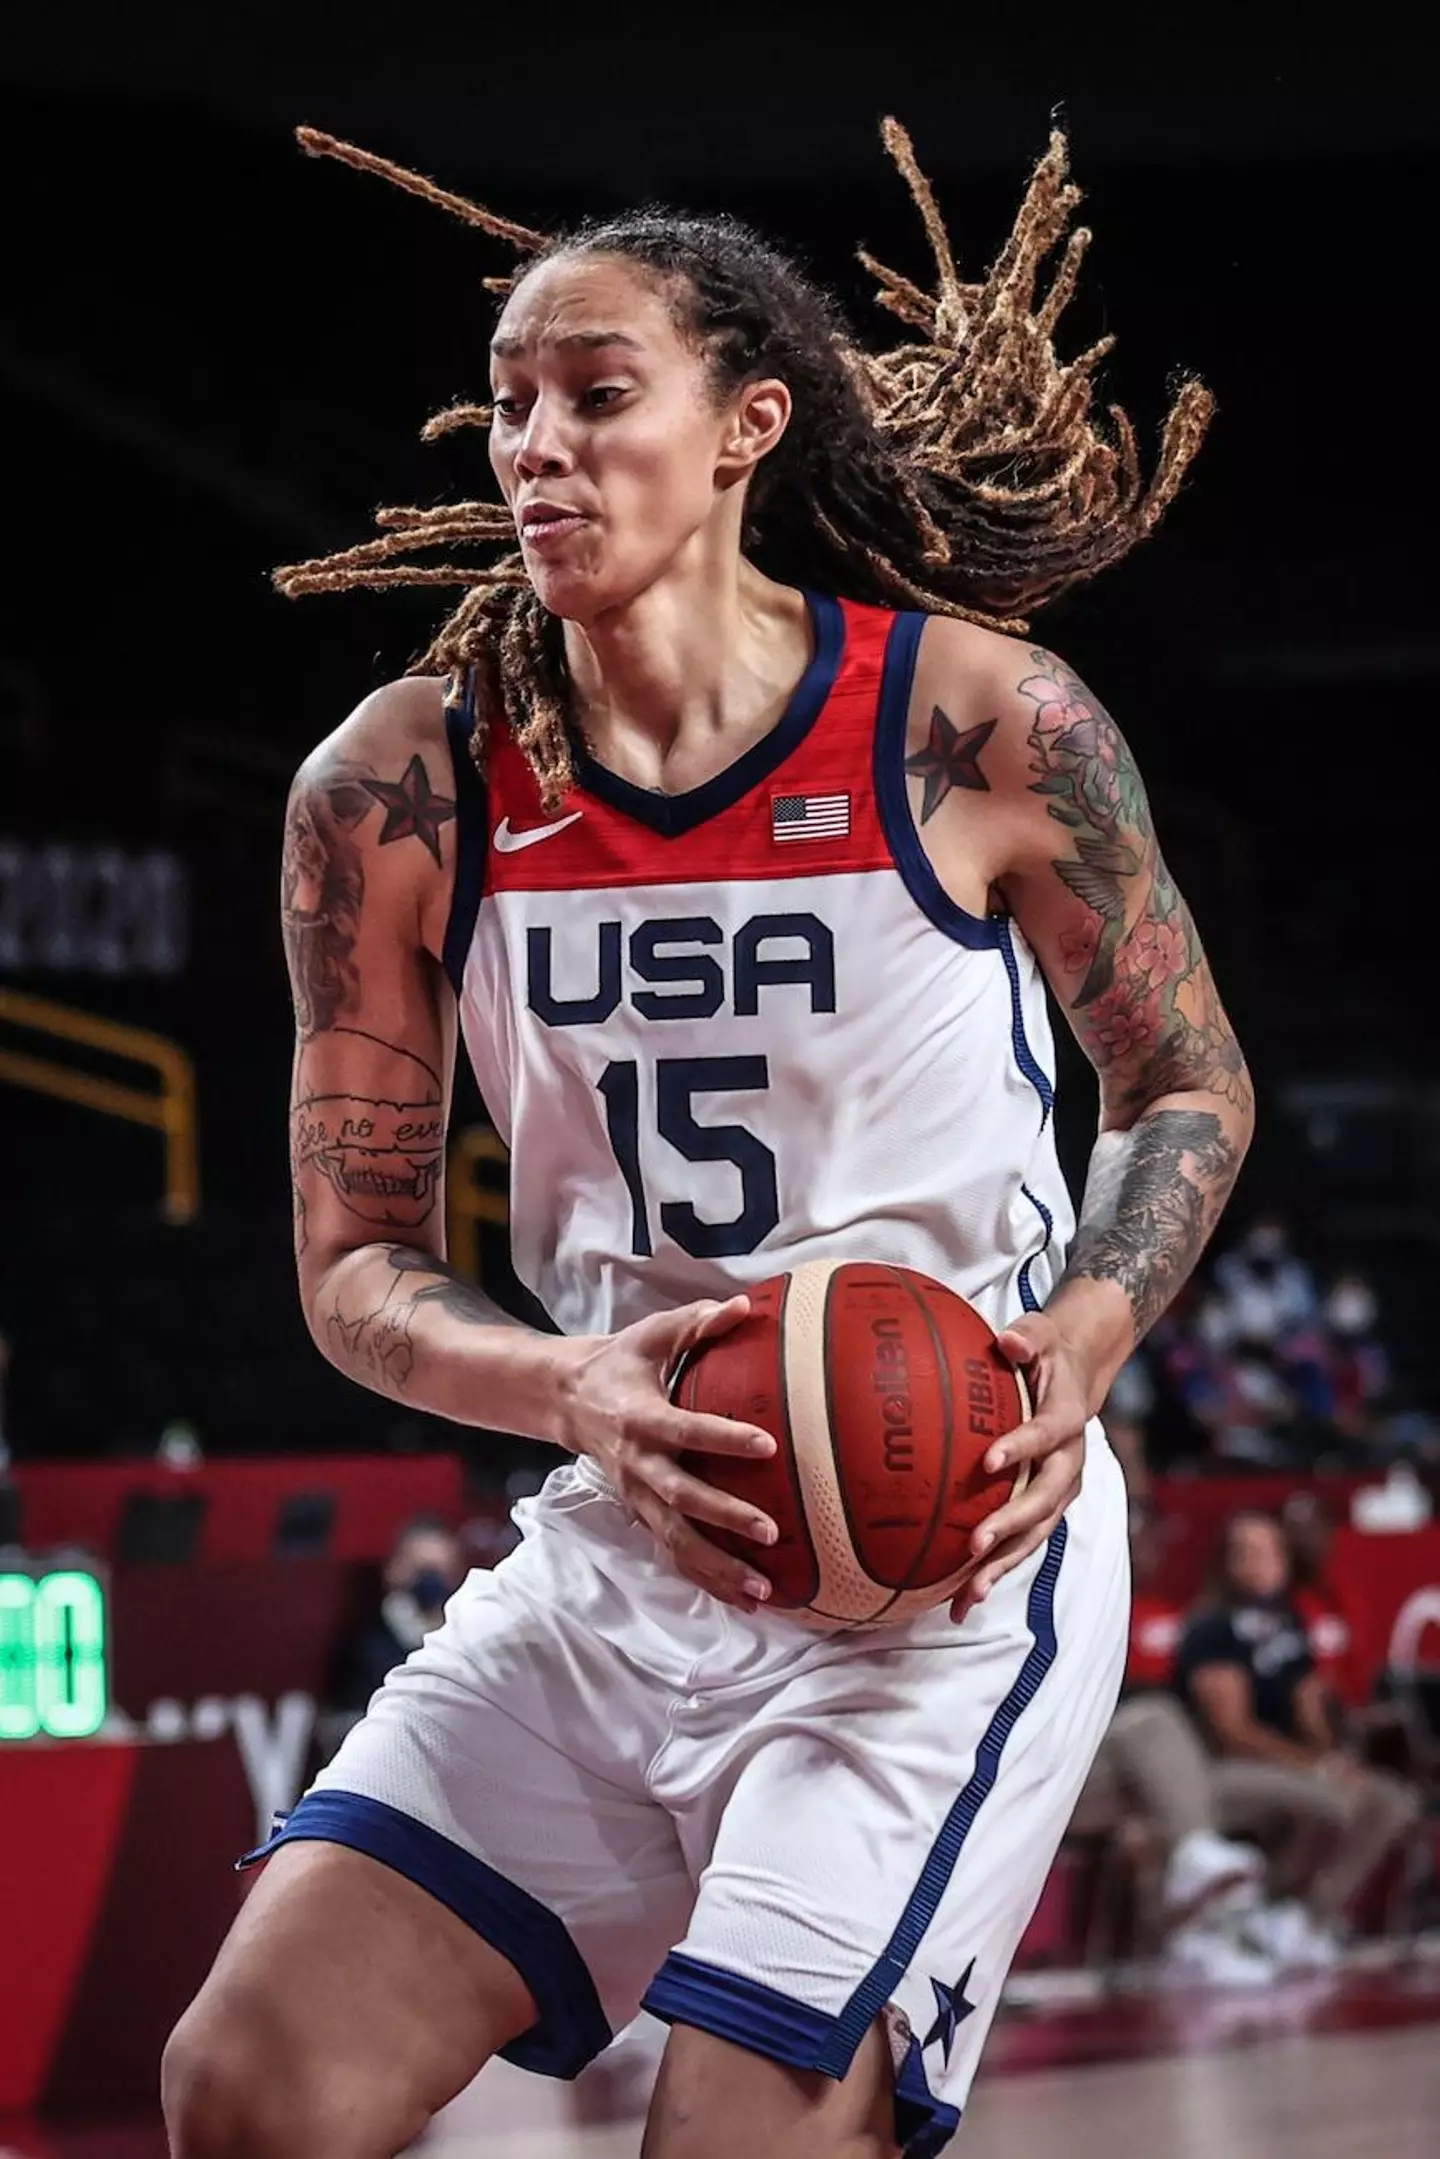 WNBA Star Brittney Griner could face 10 years in prison if convicted.